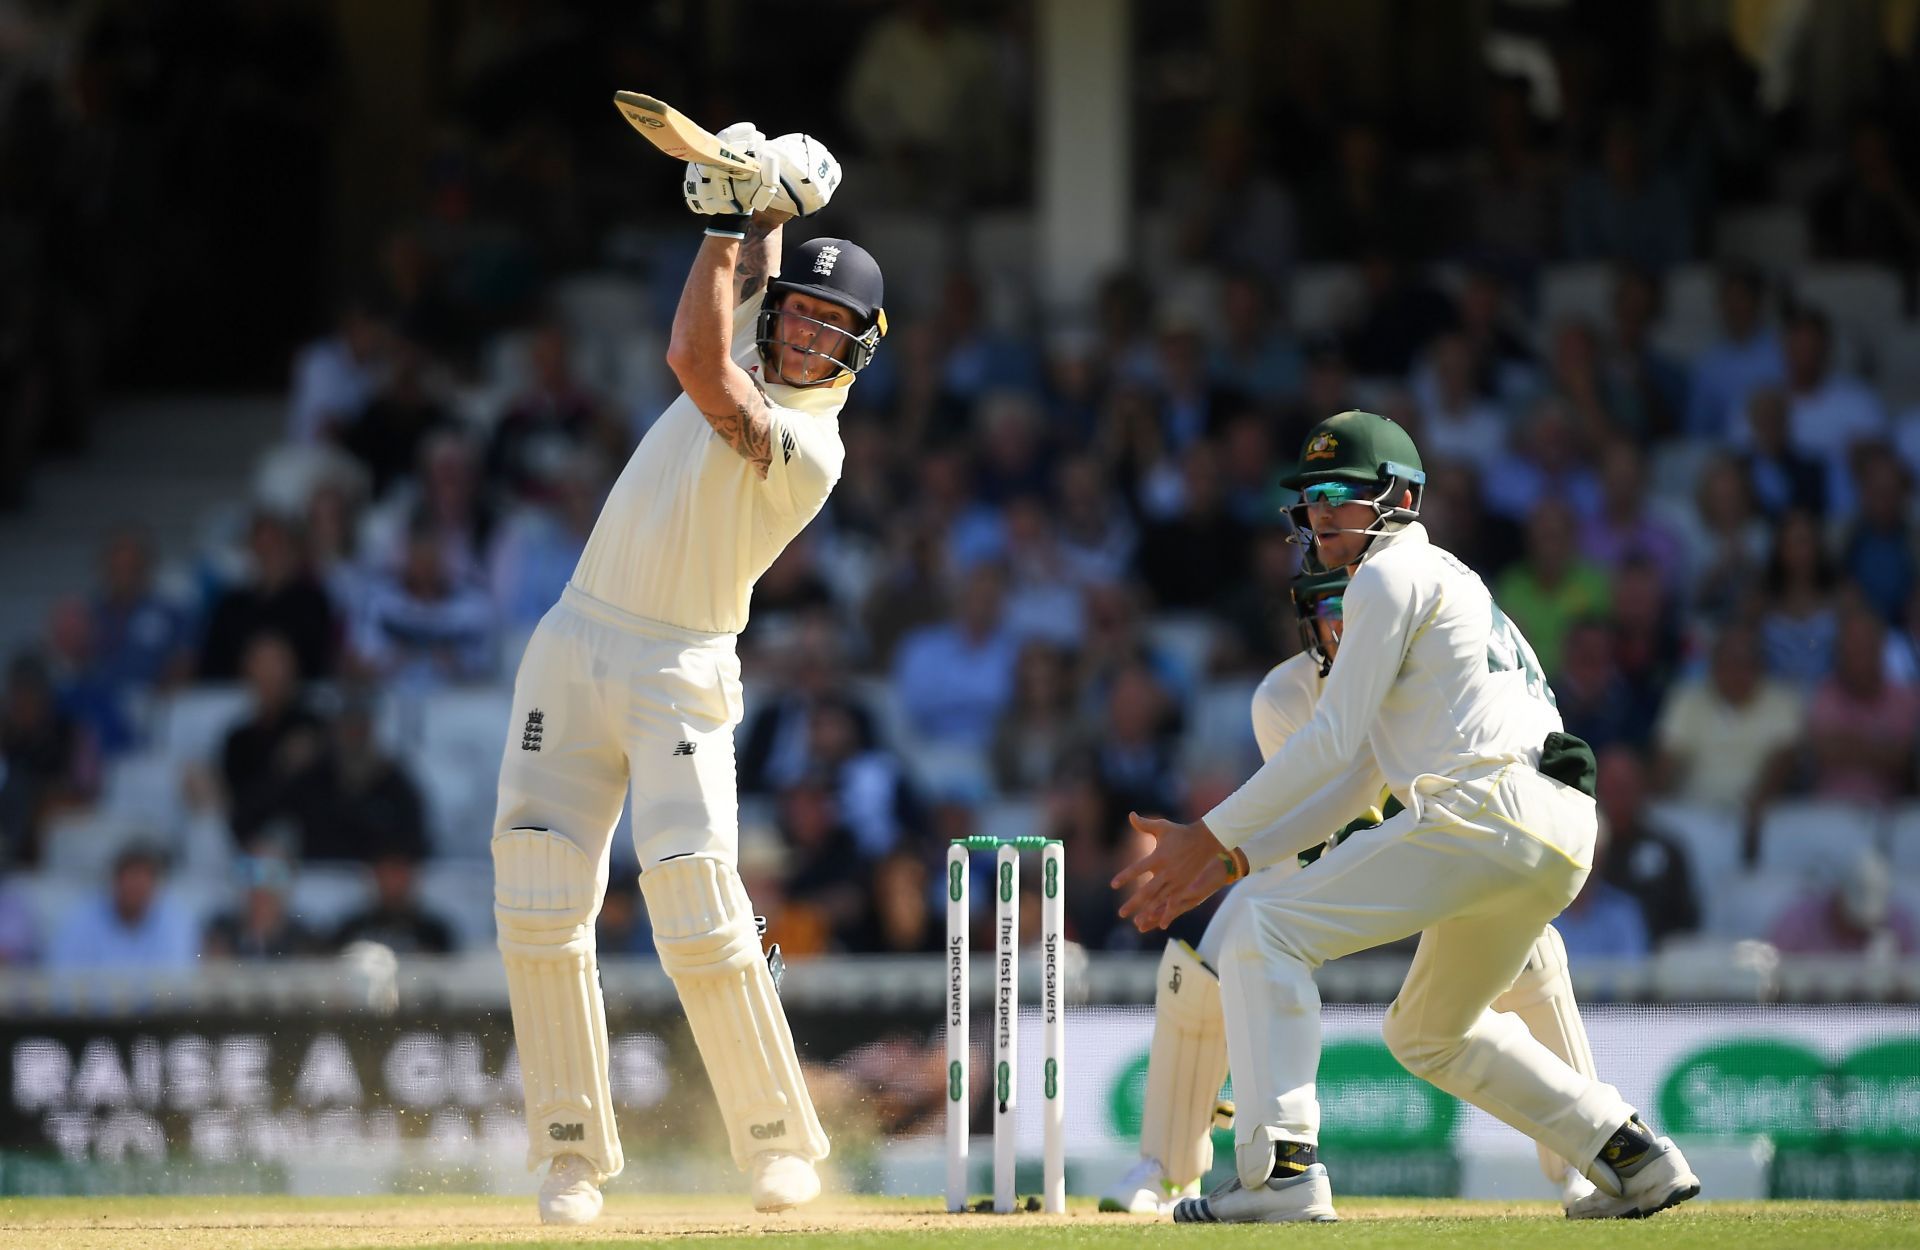 Ben Stokes batting during Ashes 2019. Pic: Getty Images